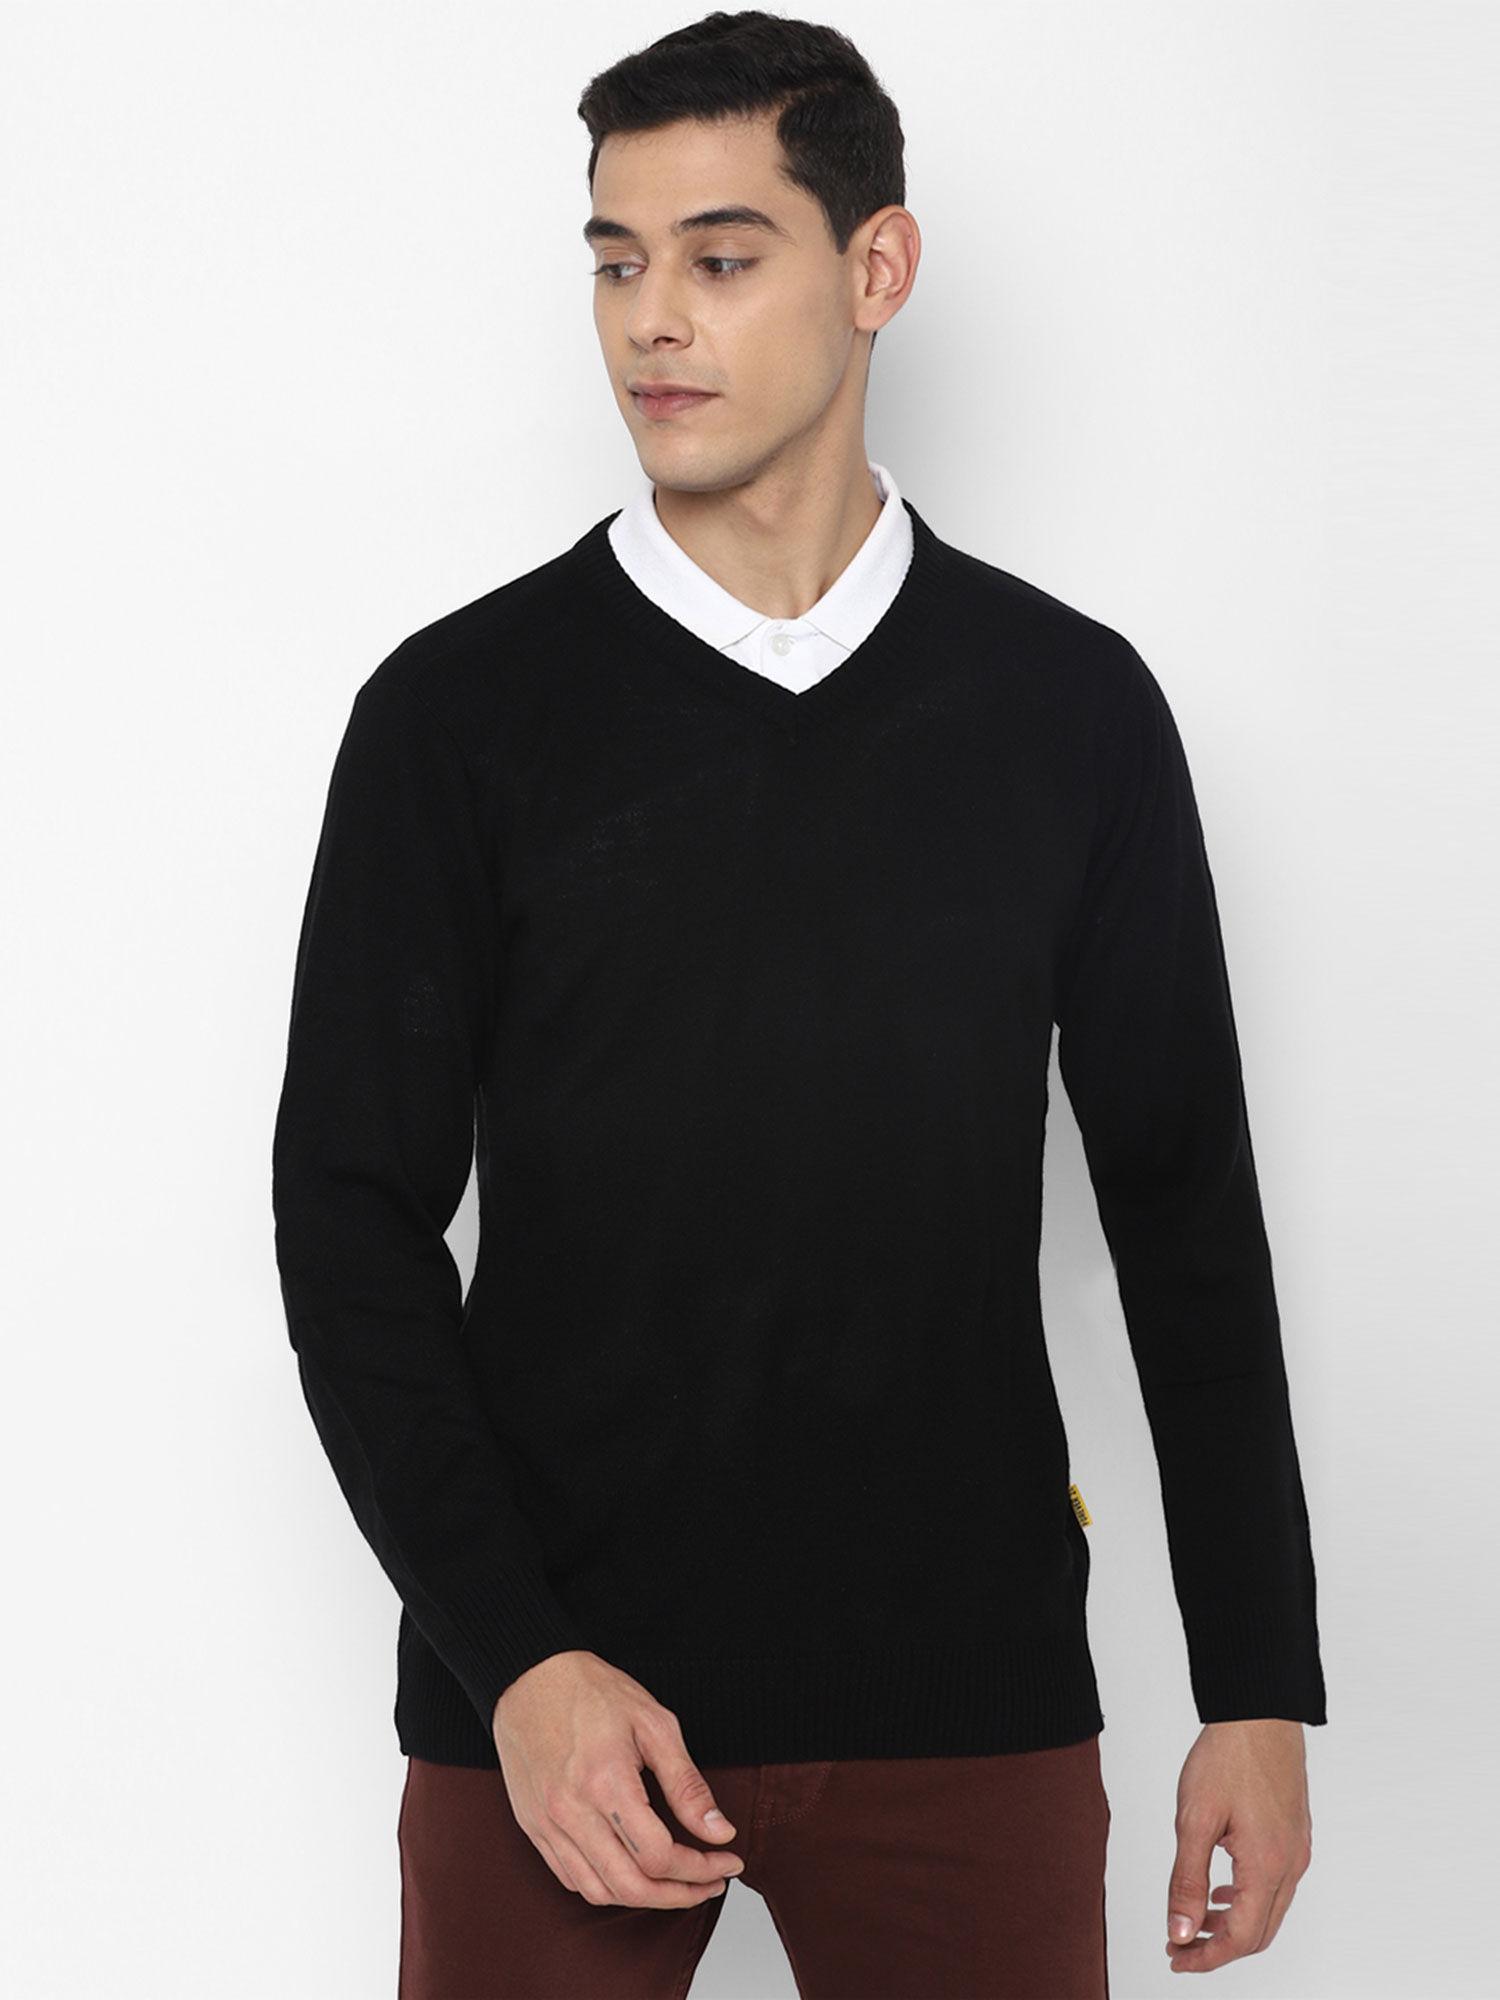 black-solid-sweater